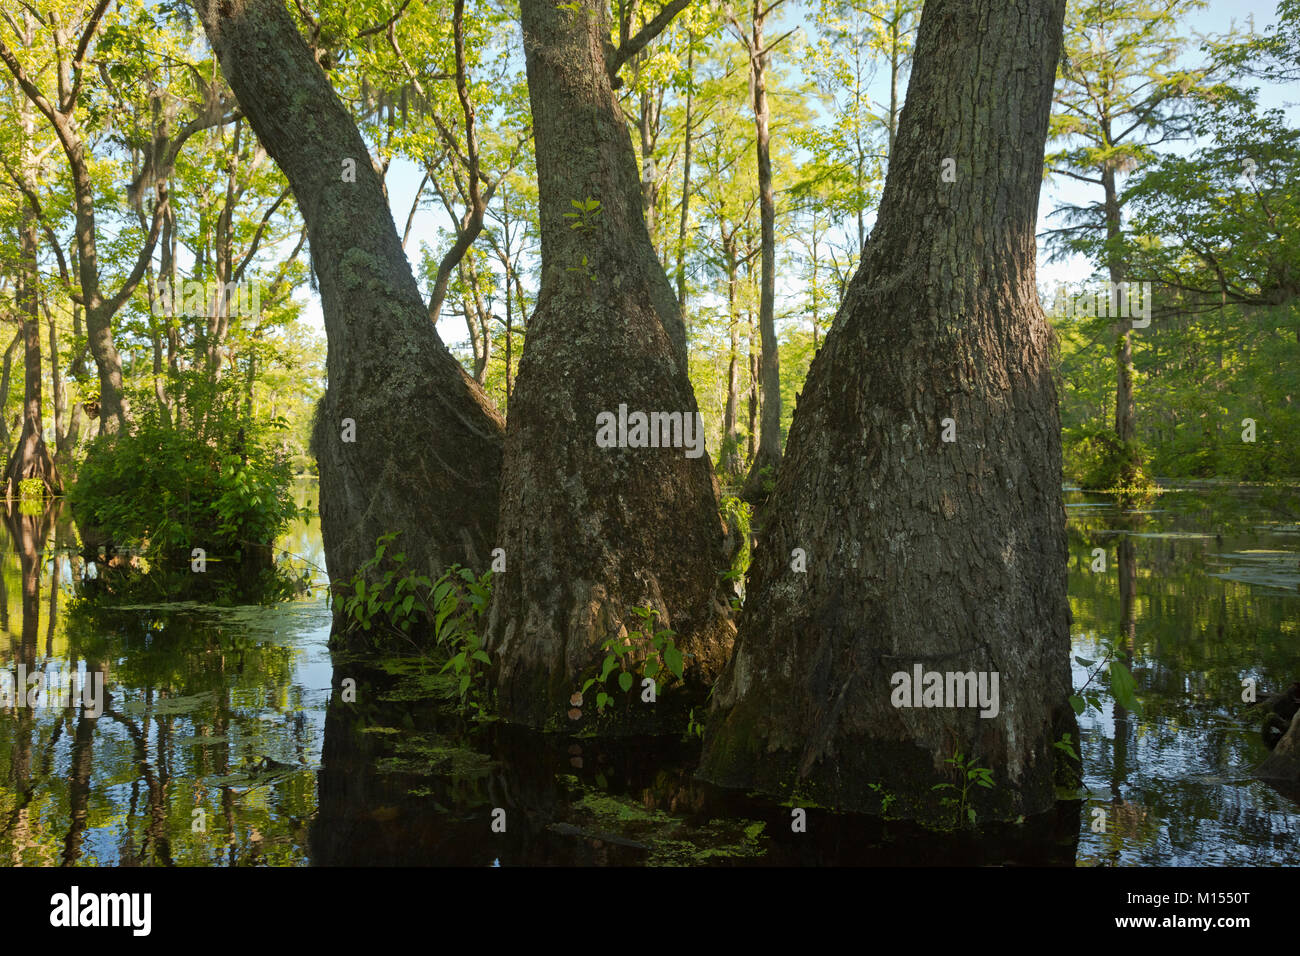 NC01491-00...NORTH CAROLINA - Large bases of bald cypress and tupelo gun trees provide stability for the trees growing in a swamp, Merchants Millpond. Stock Photo